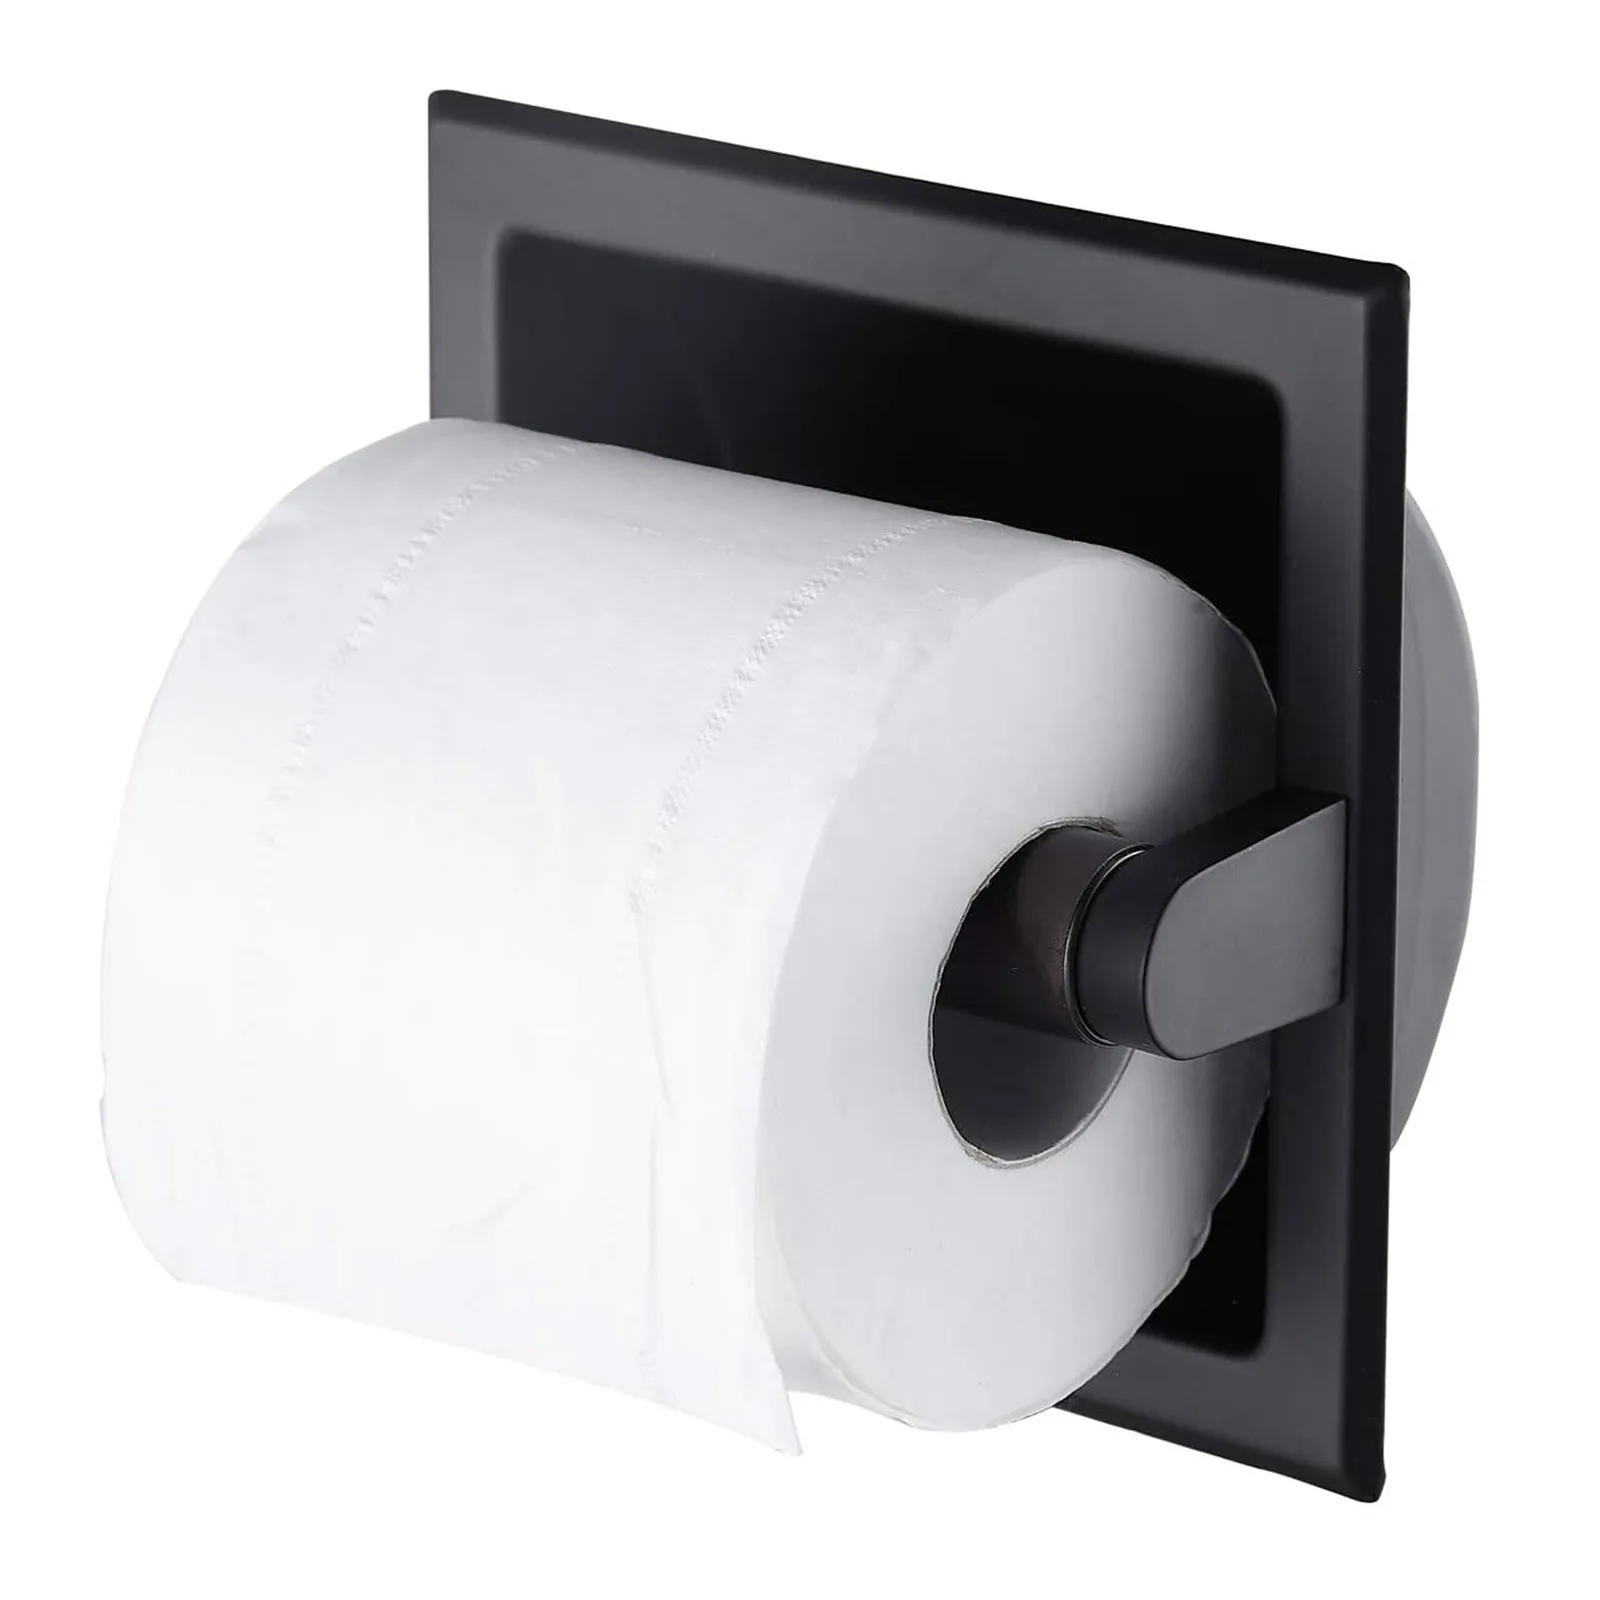 

Tissue Rack Built-in Toilet Paper Holder Holders Wall Recessed Stainless Steel Bathroom Storage Mounted Durable Roll Dispenser